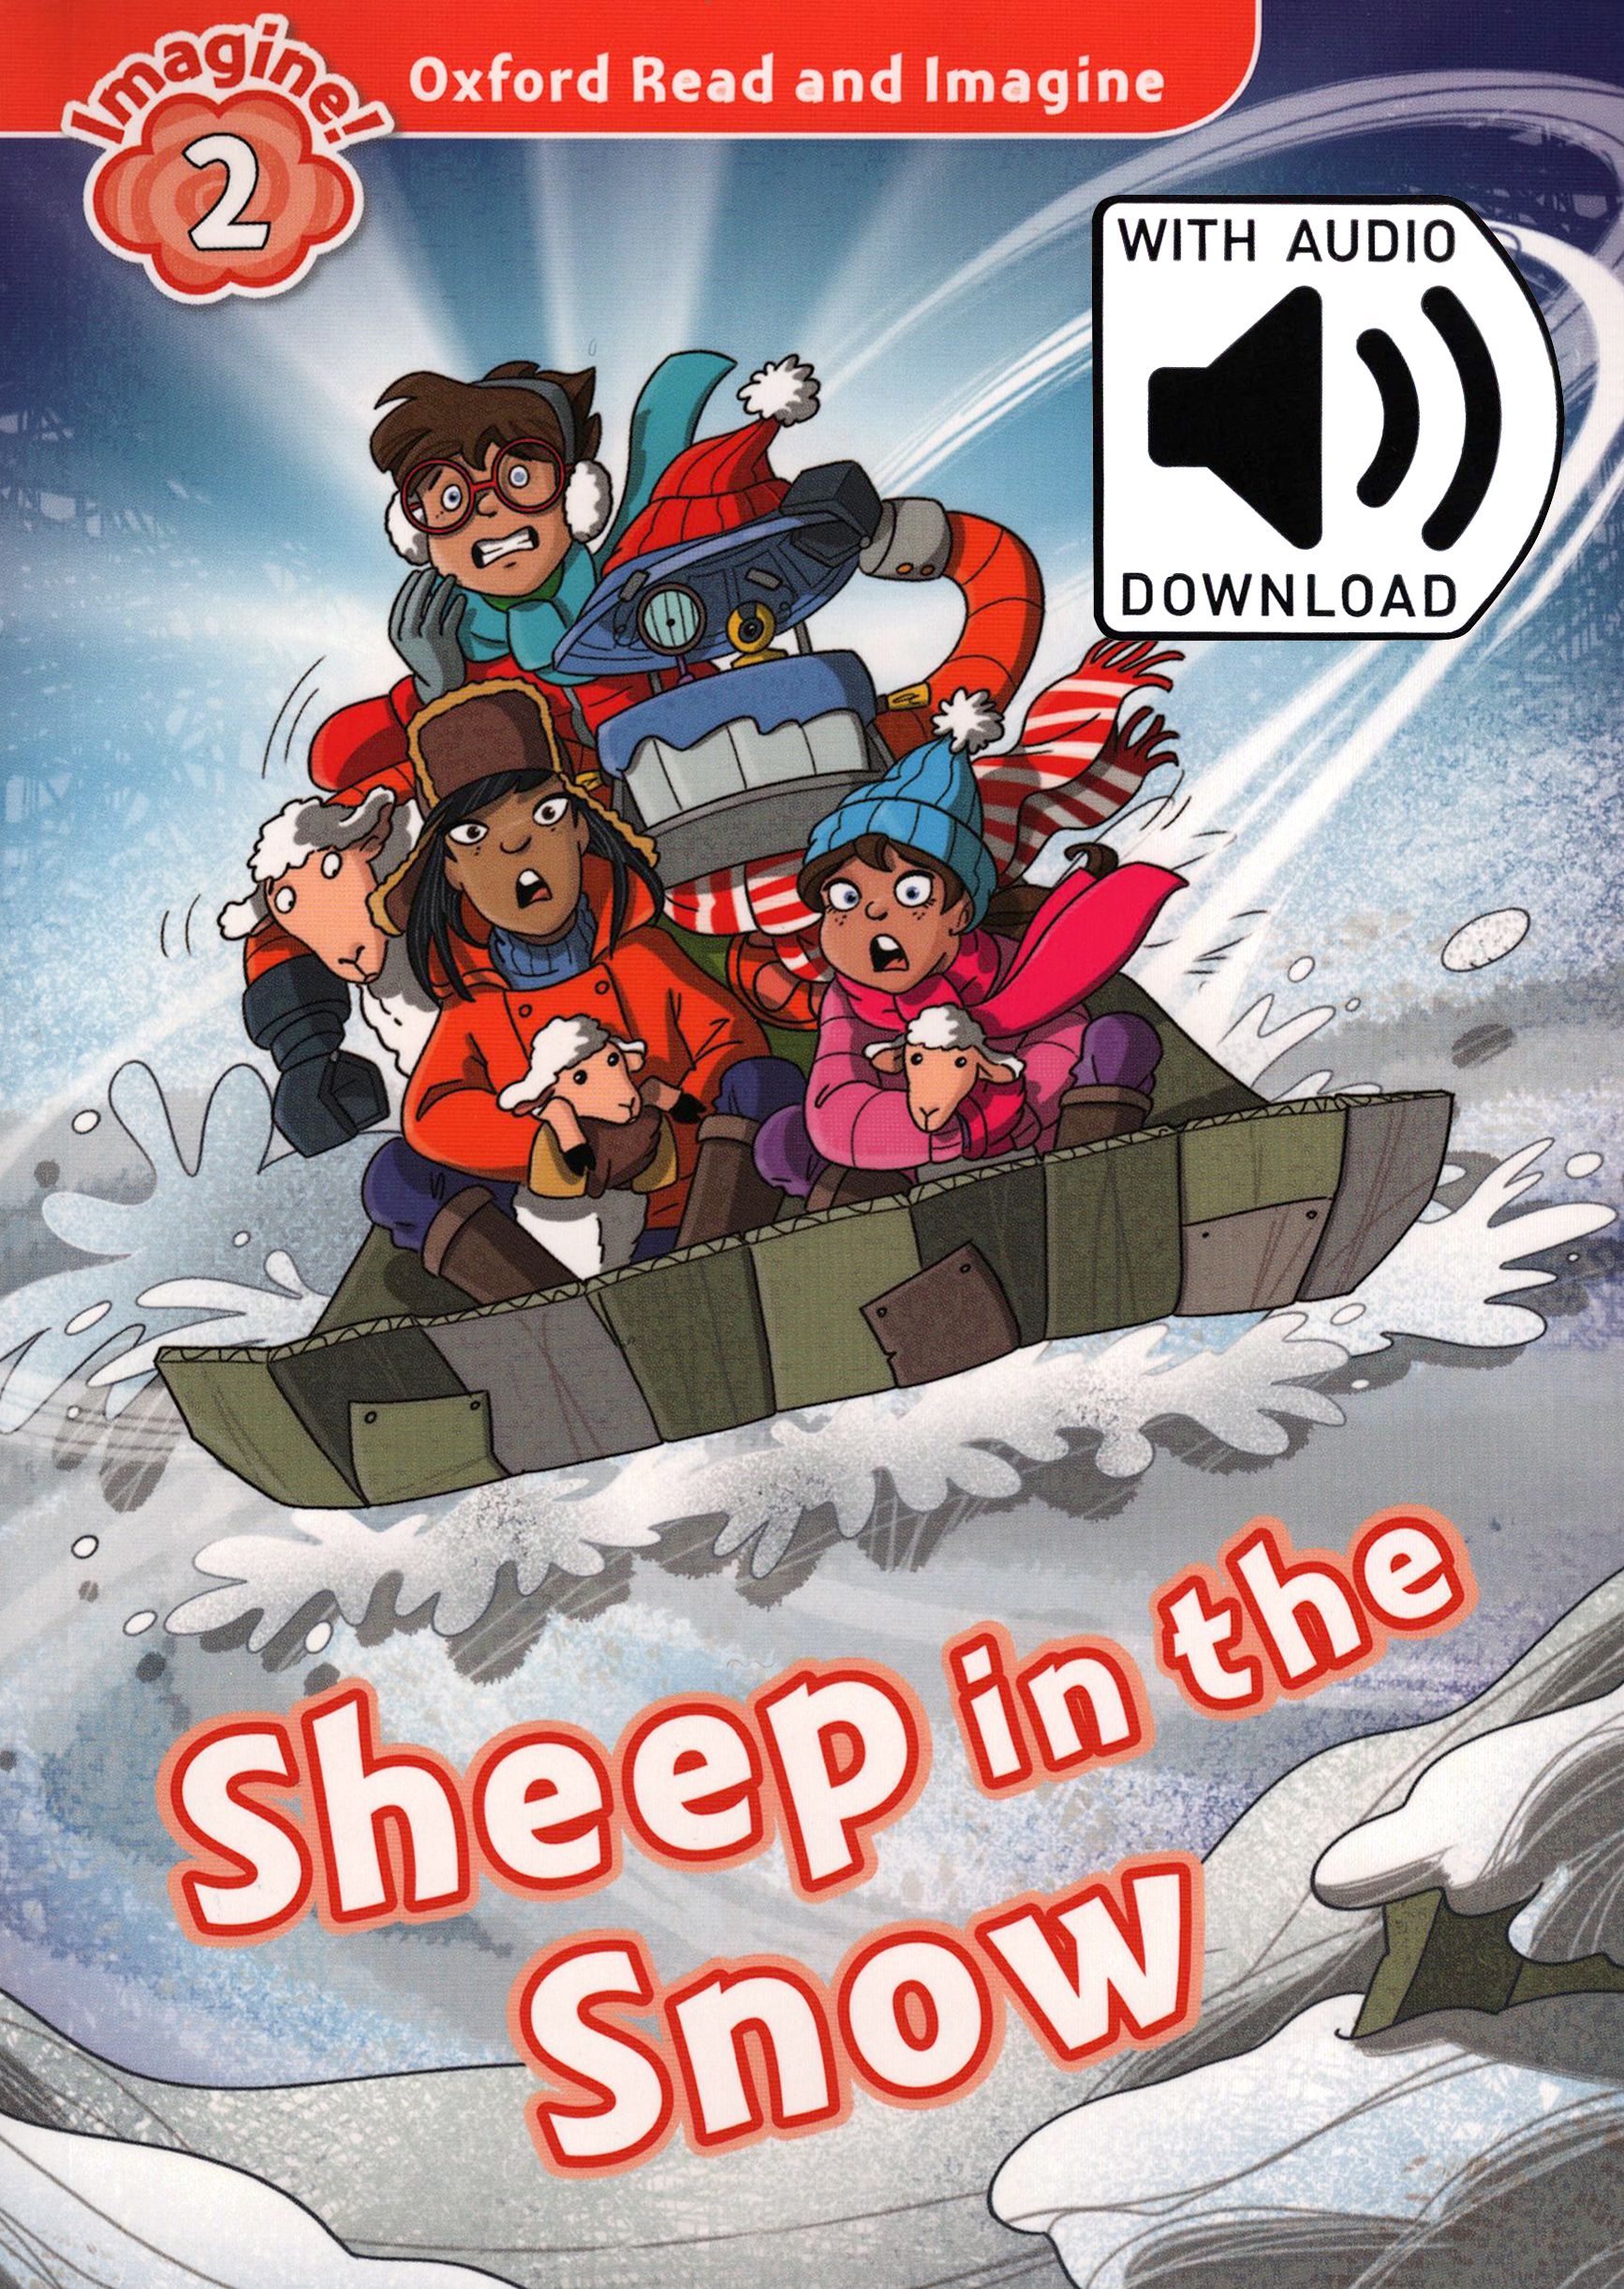 Oxford reading and imagine. Oxford read and imagine. Oxford read and imagine 1 book. Sheep in the Snow activity book. Rosie and Ben Oxford read and imagine.